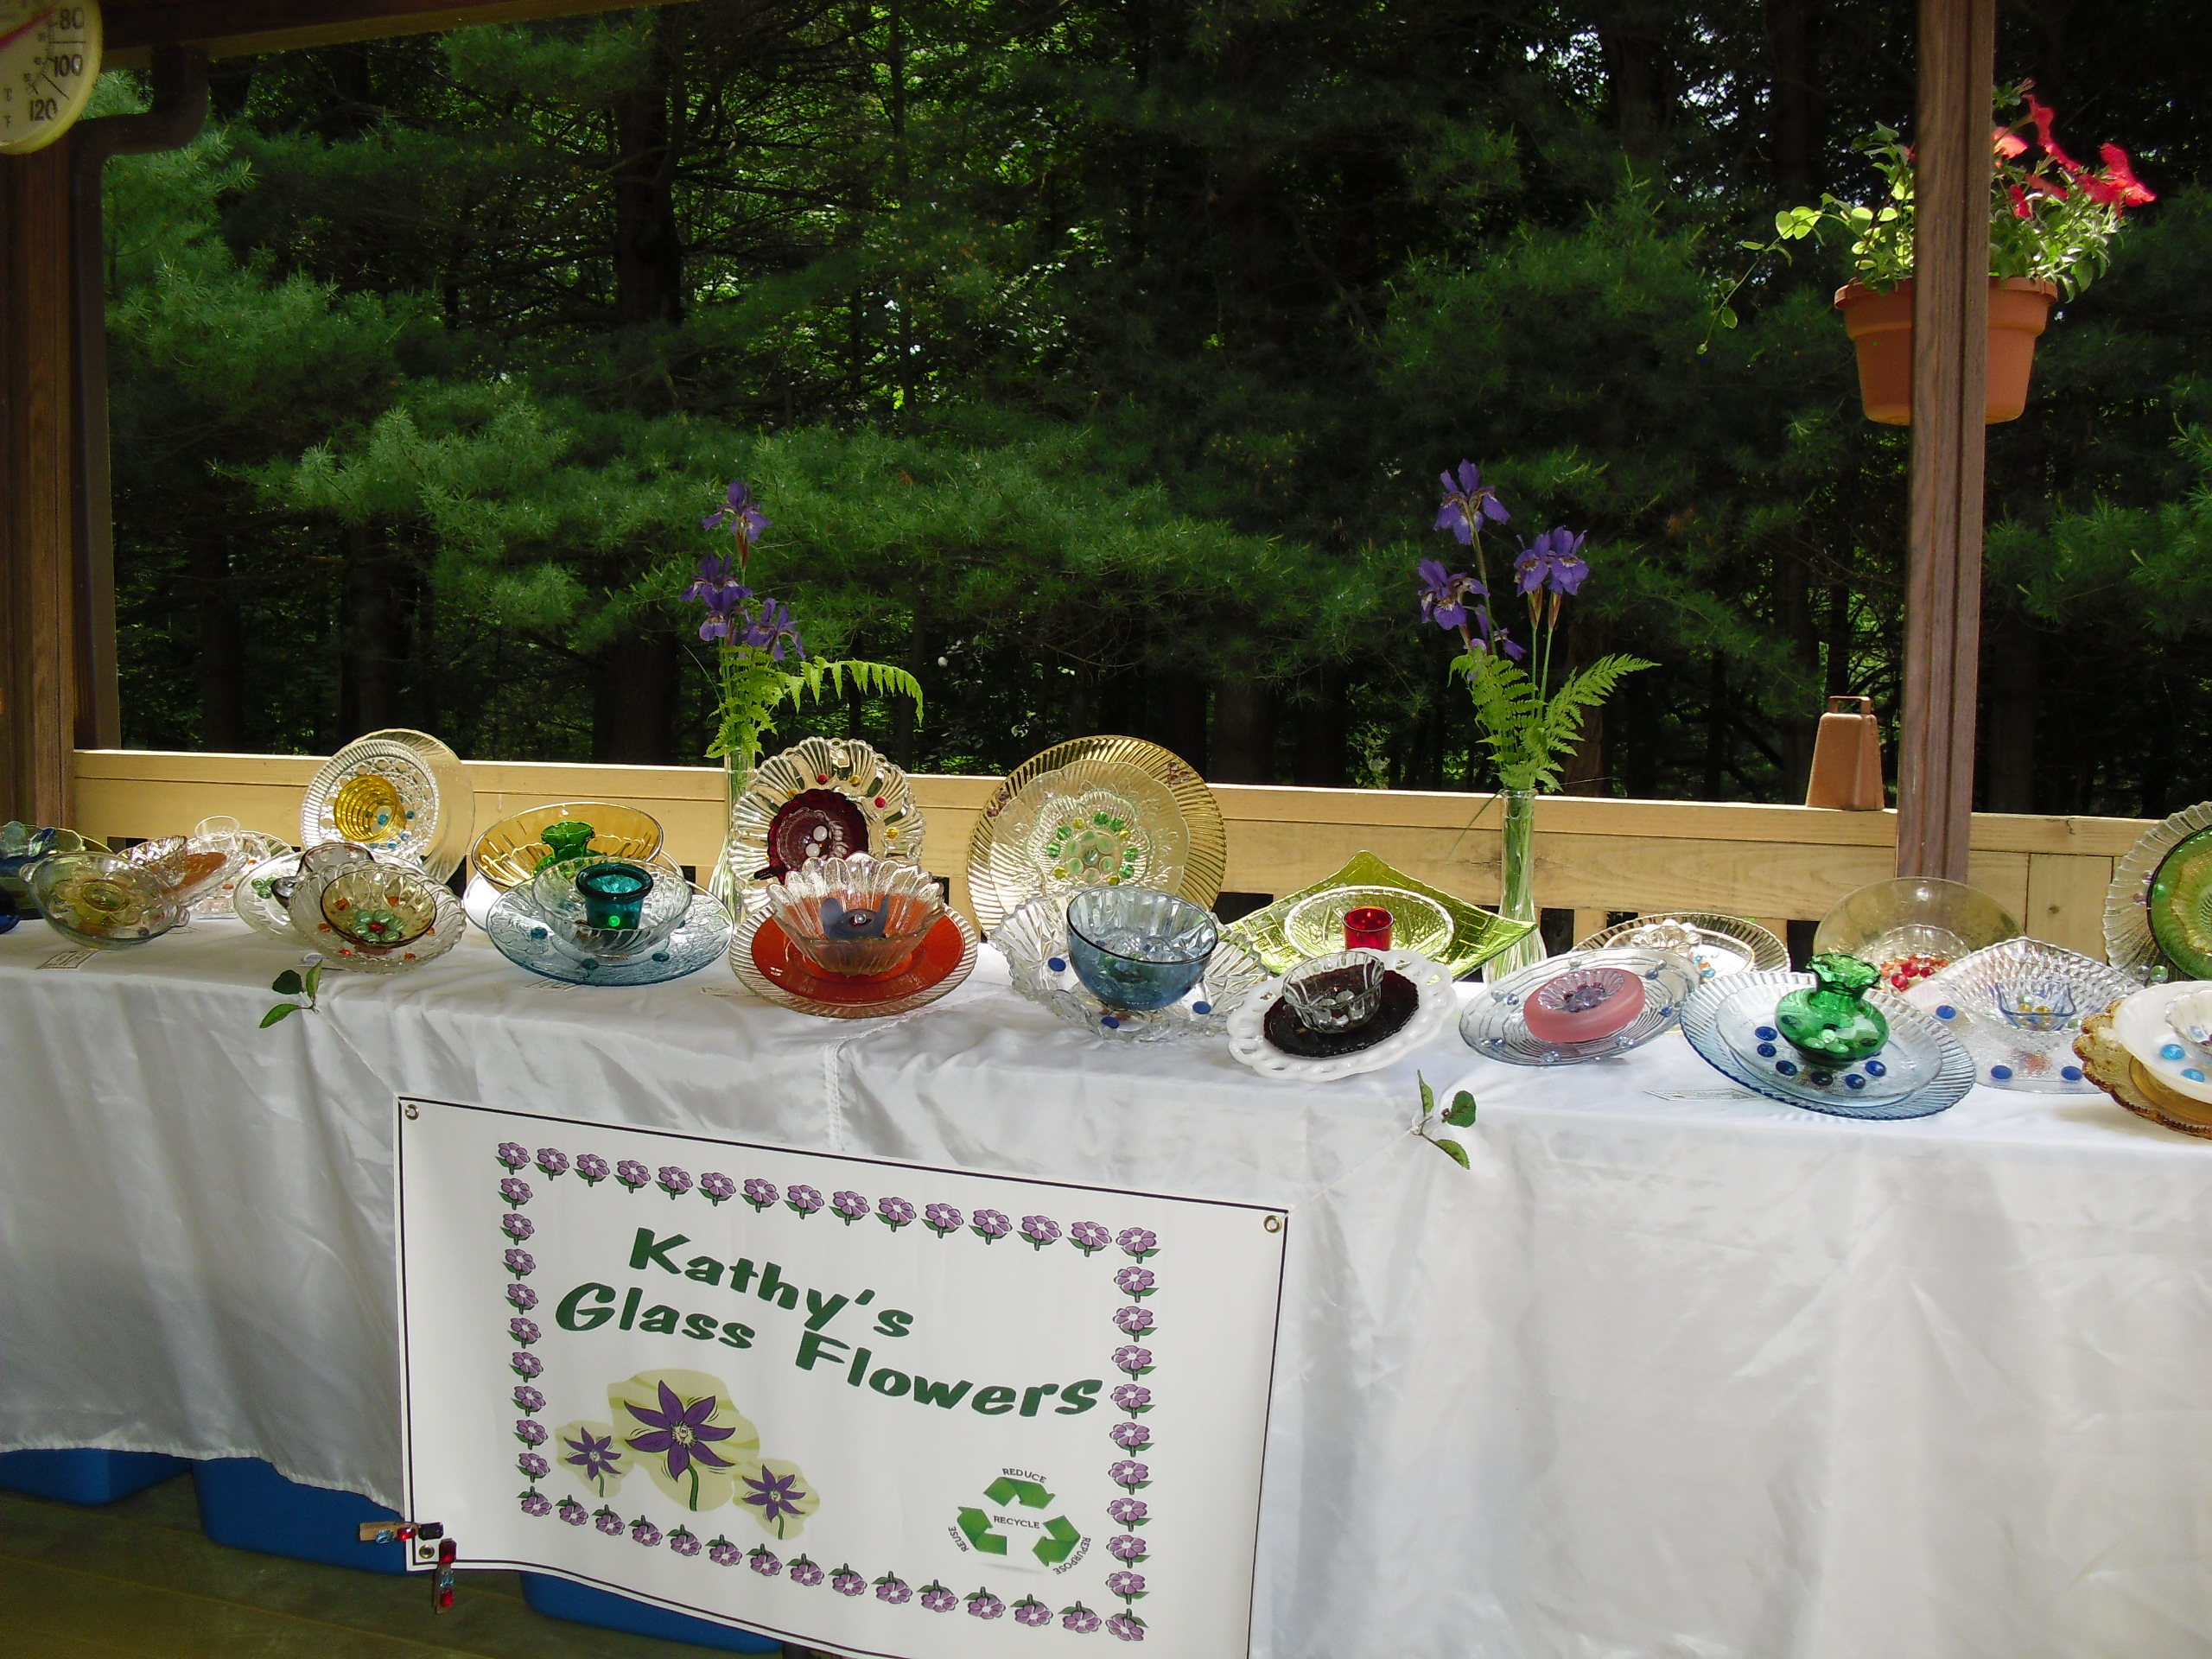 2017 Craft Show Schedule – Kathy's Glass Flowers